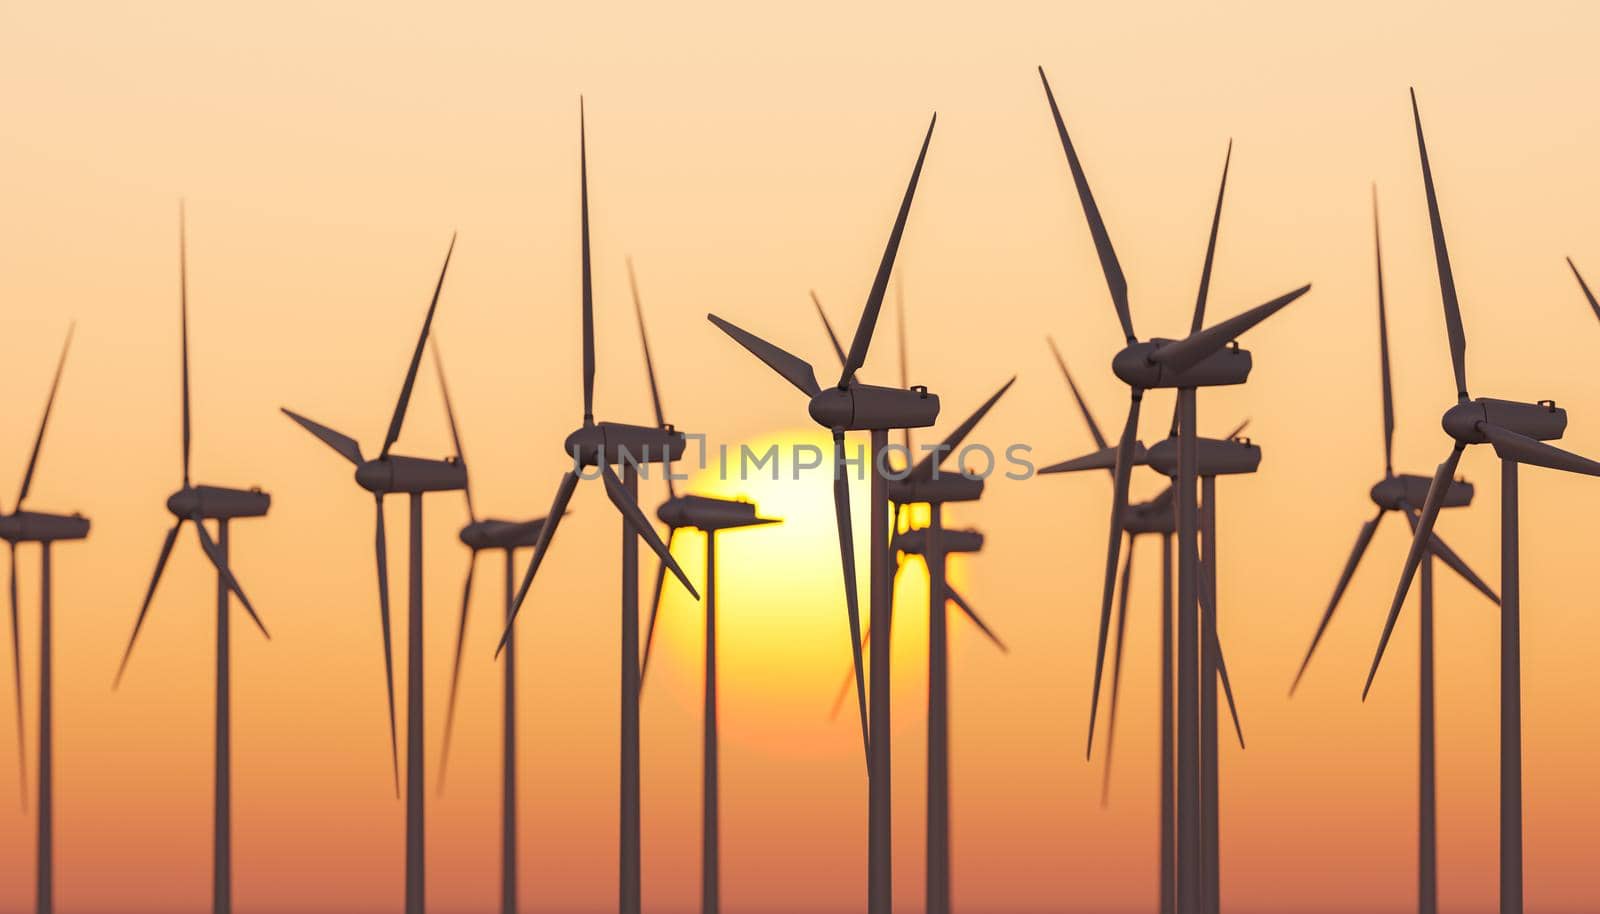 Many modern windmills placed against bright orange sundown sky with sun for concept of alternative energy. 3d rendering